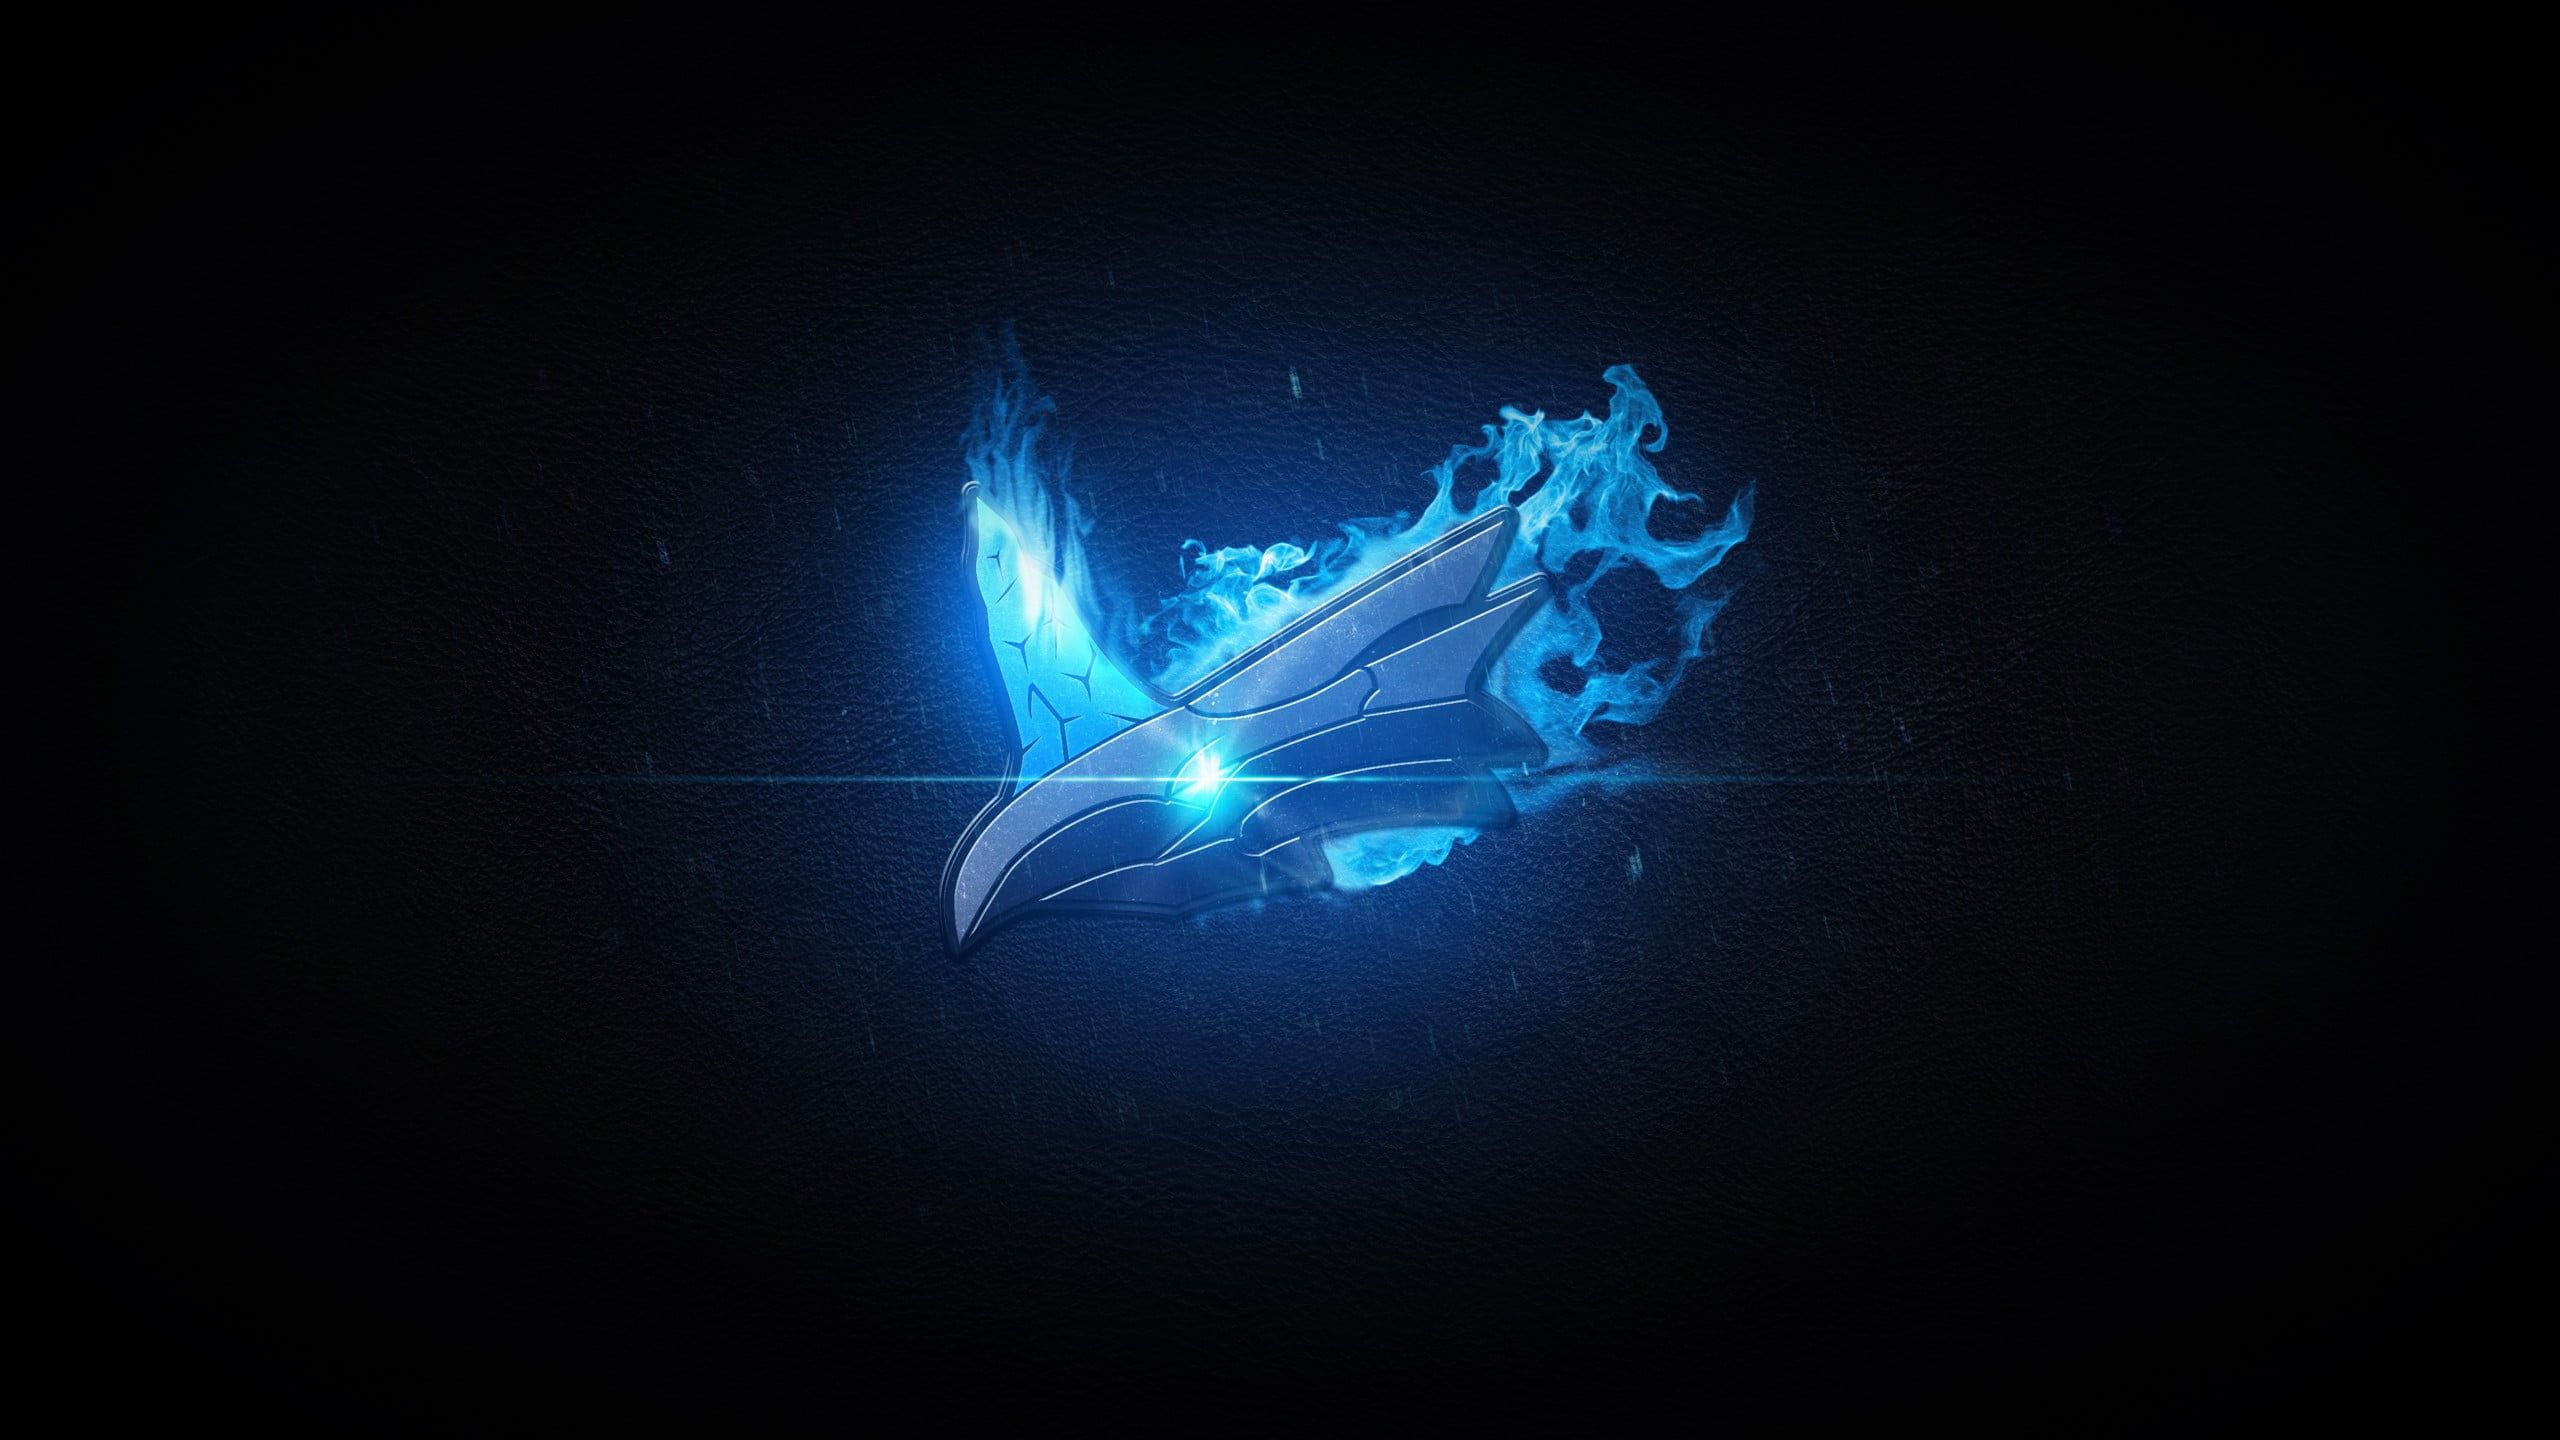 Blue and grey flame logo, Riot Games, League of Legends, Anivia HD